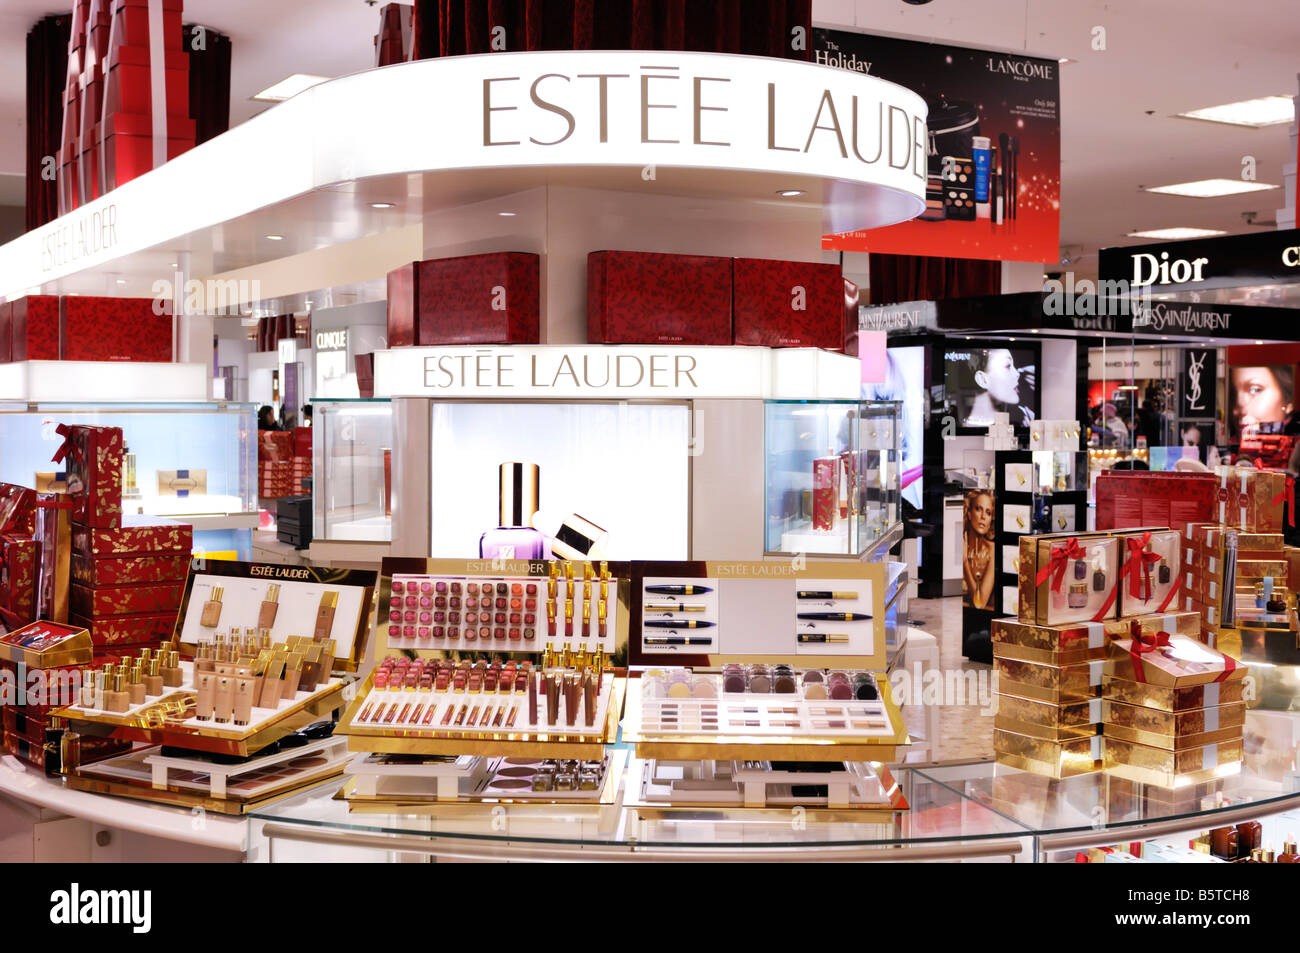 Estee Lauder cosmetics display in a shopping mall Stock Photo